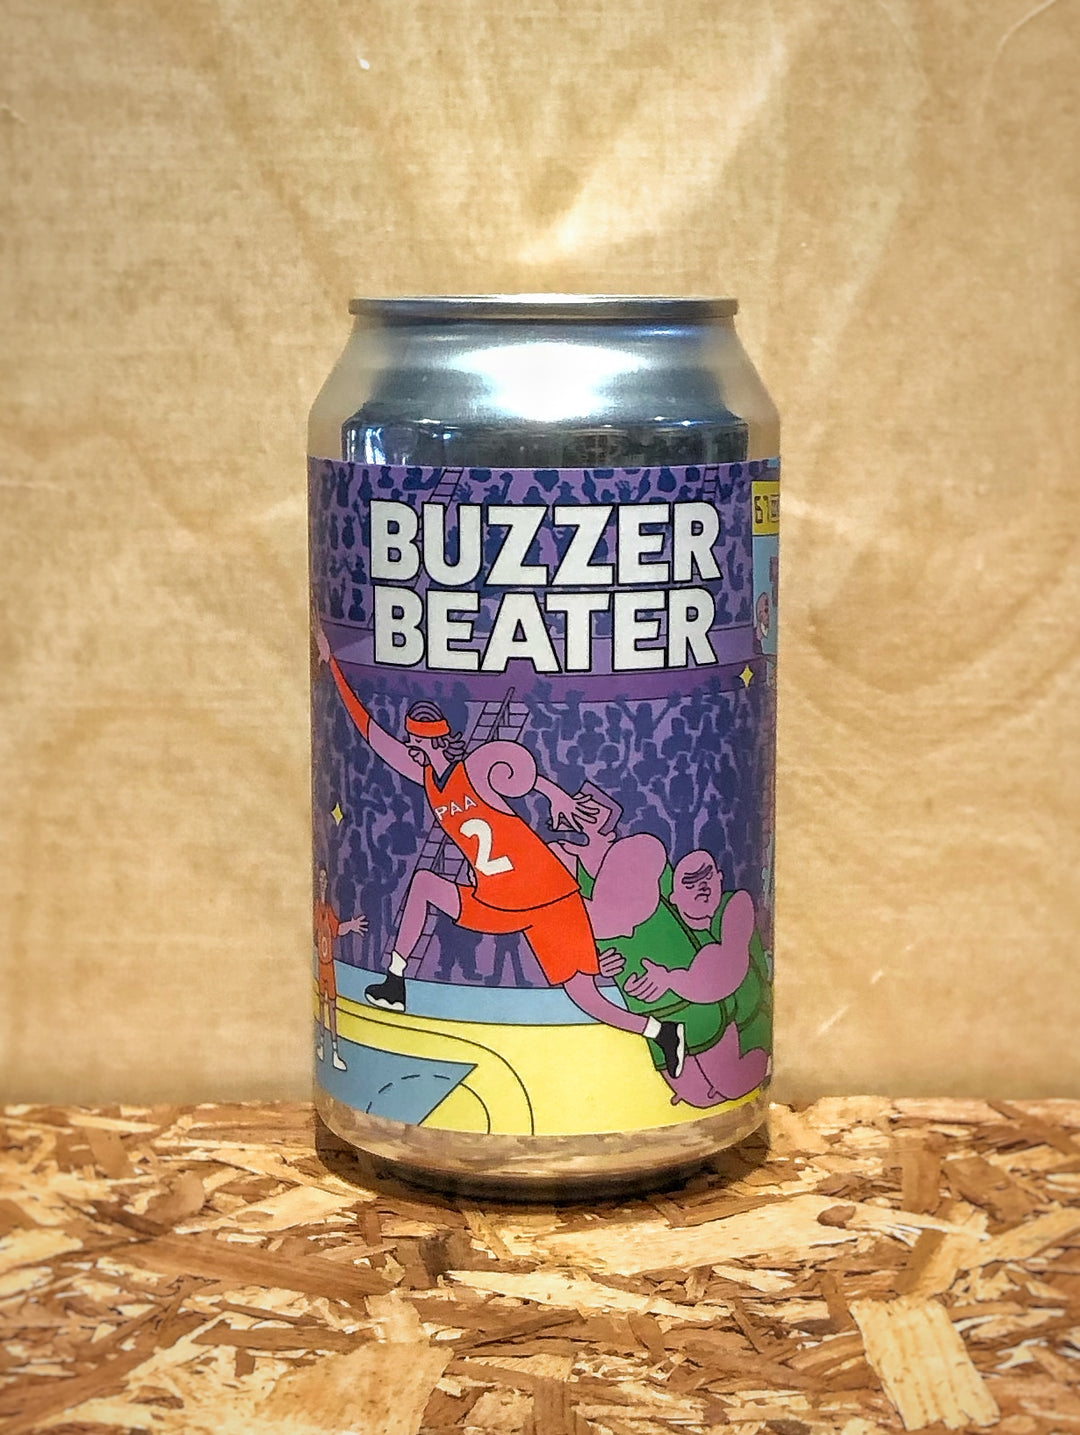 Prairie Artisan Ales 'Buzzer Beater' Sour Ale with Natural Flavors and FD&C Blue #1 (Oklahoma City, OK)